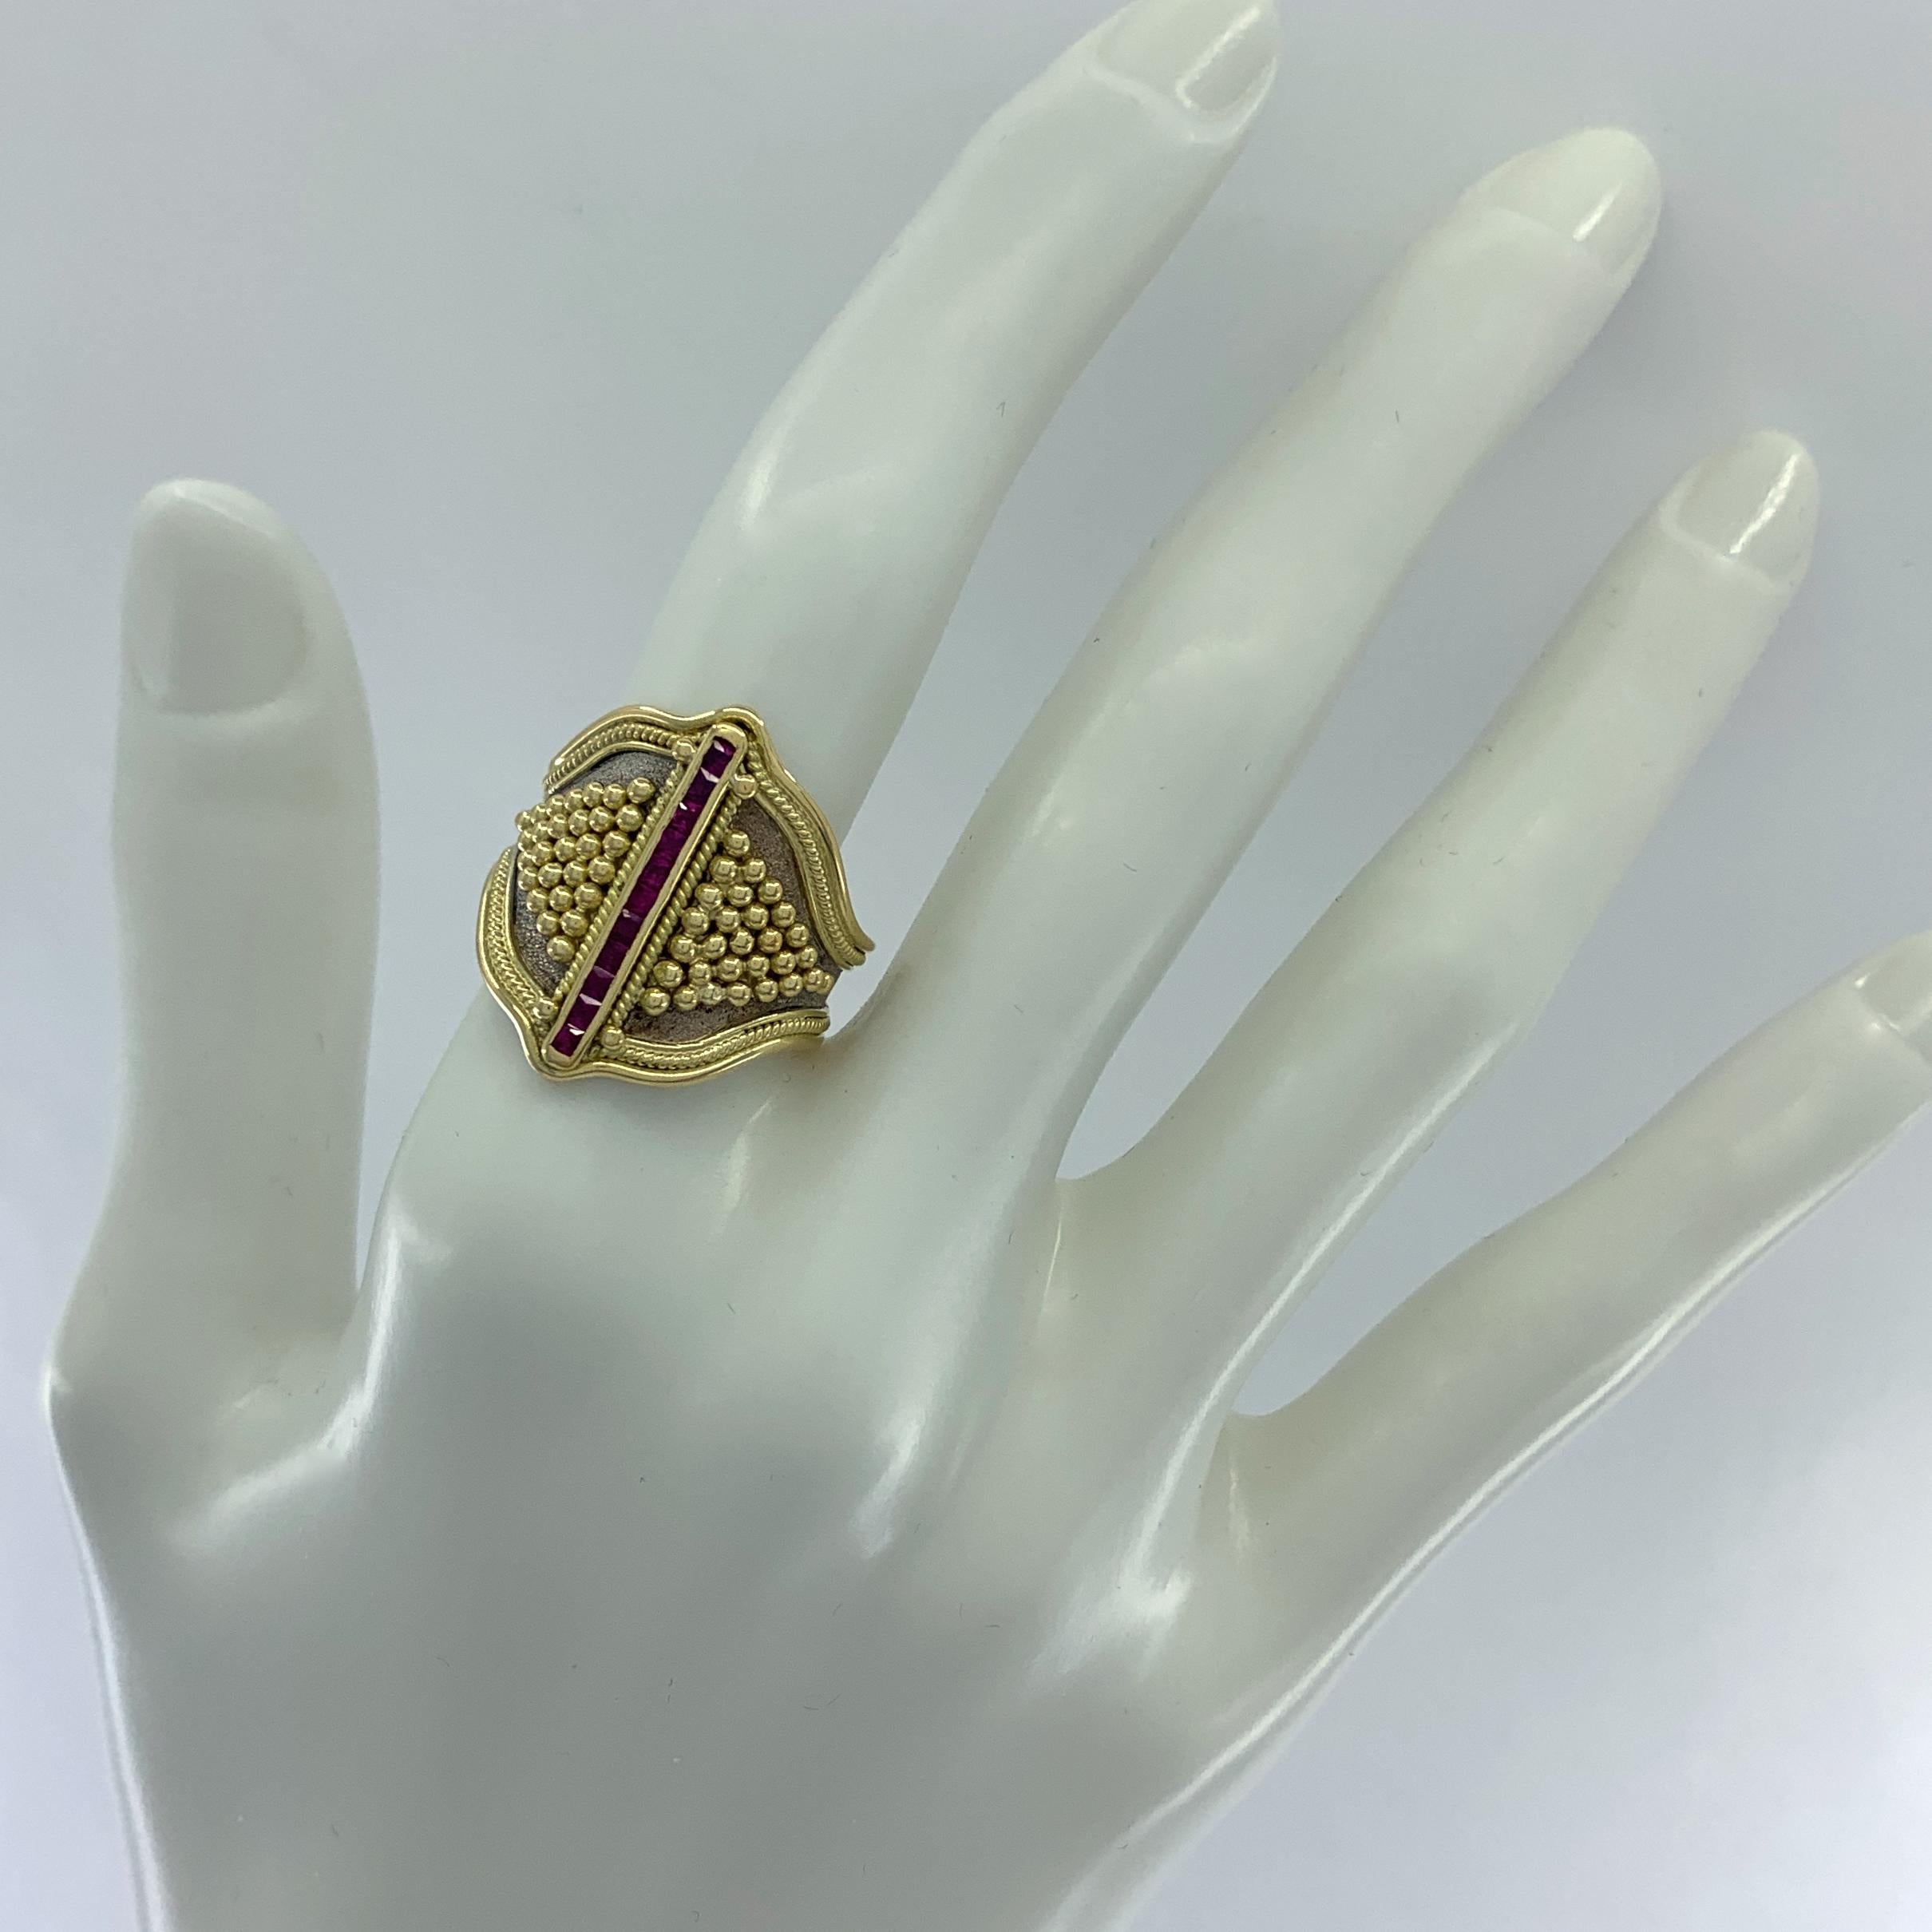 Women's or Men's Cigar Band or Shield Ring in 18K Gold with Carré-Cut Rubies & Granulation Detail